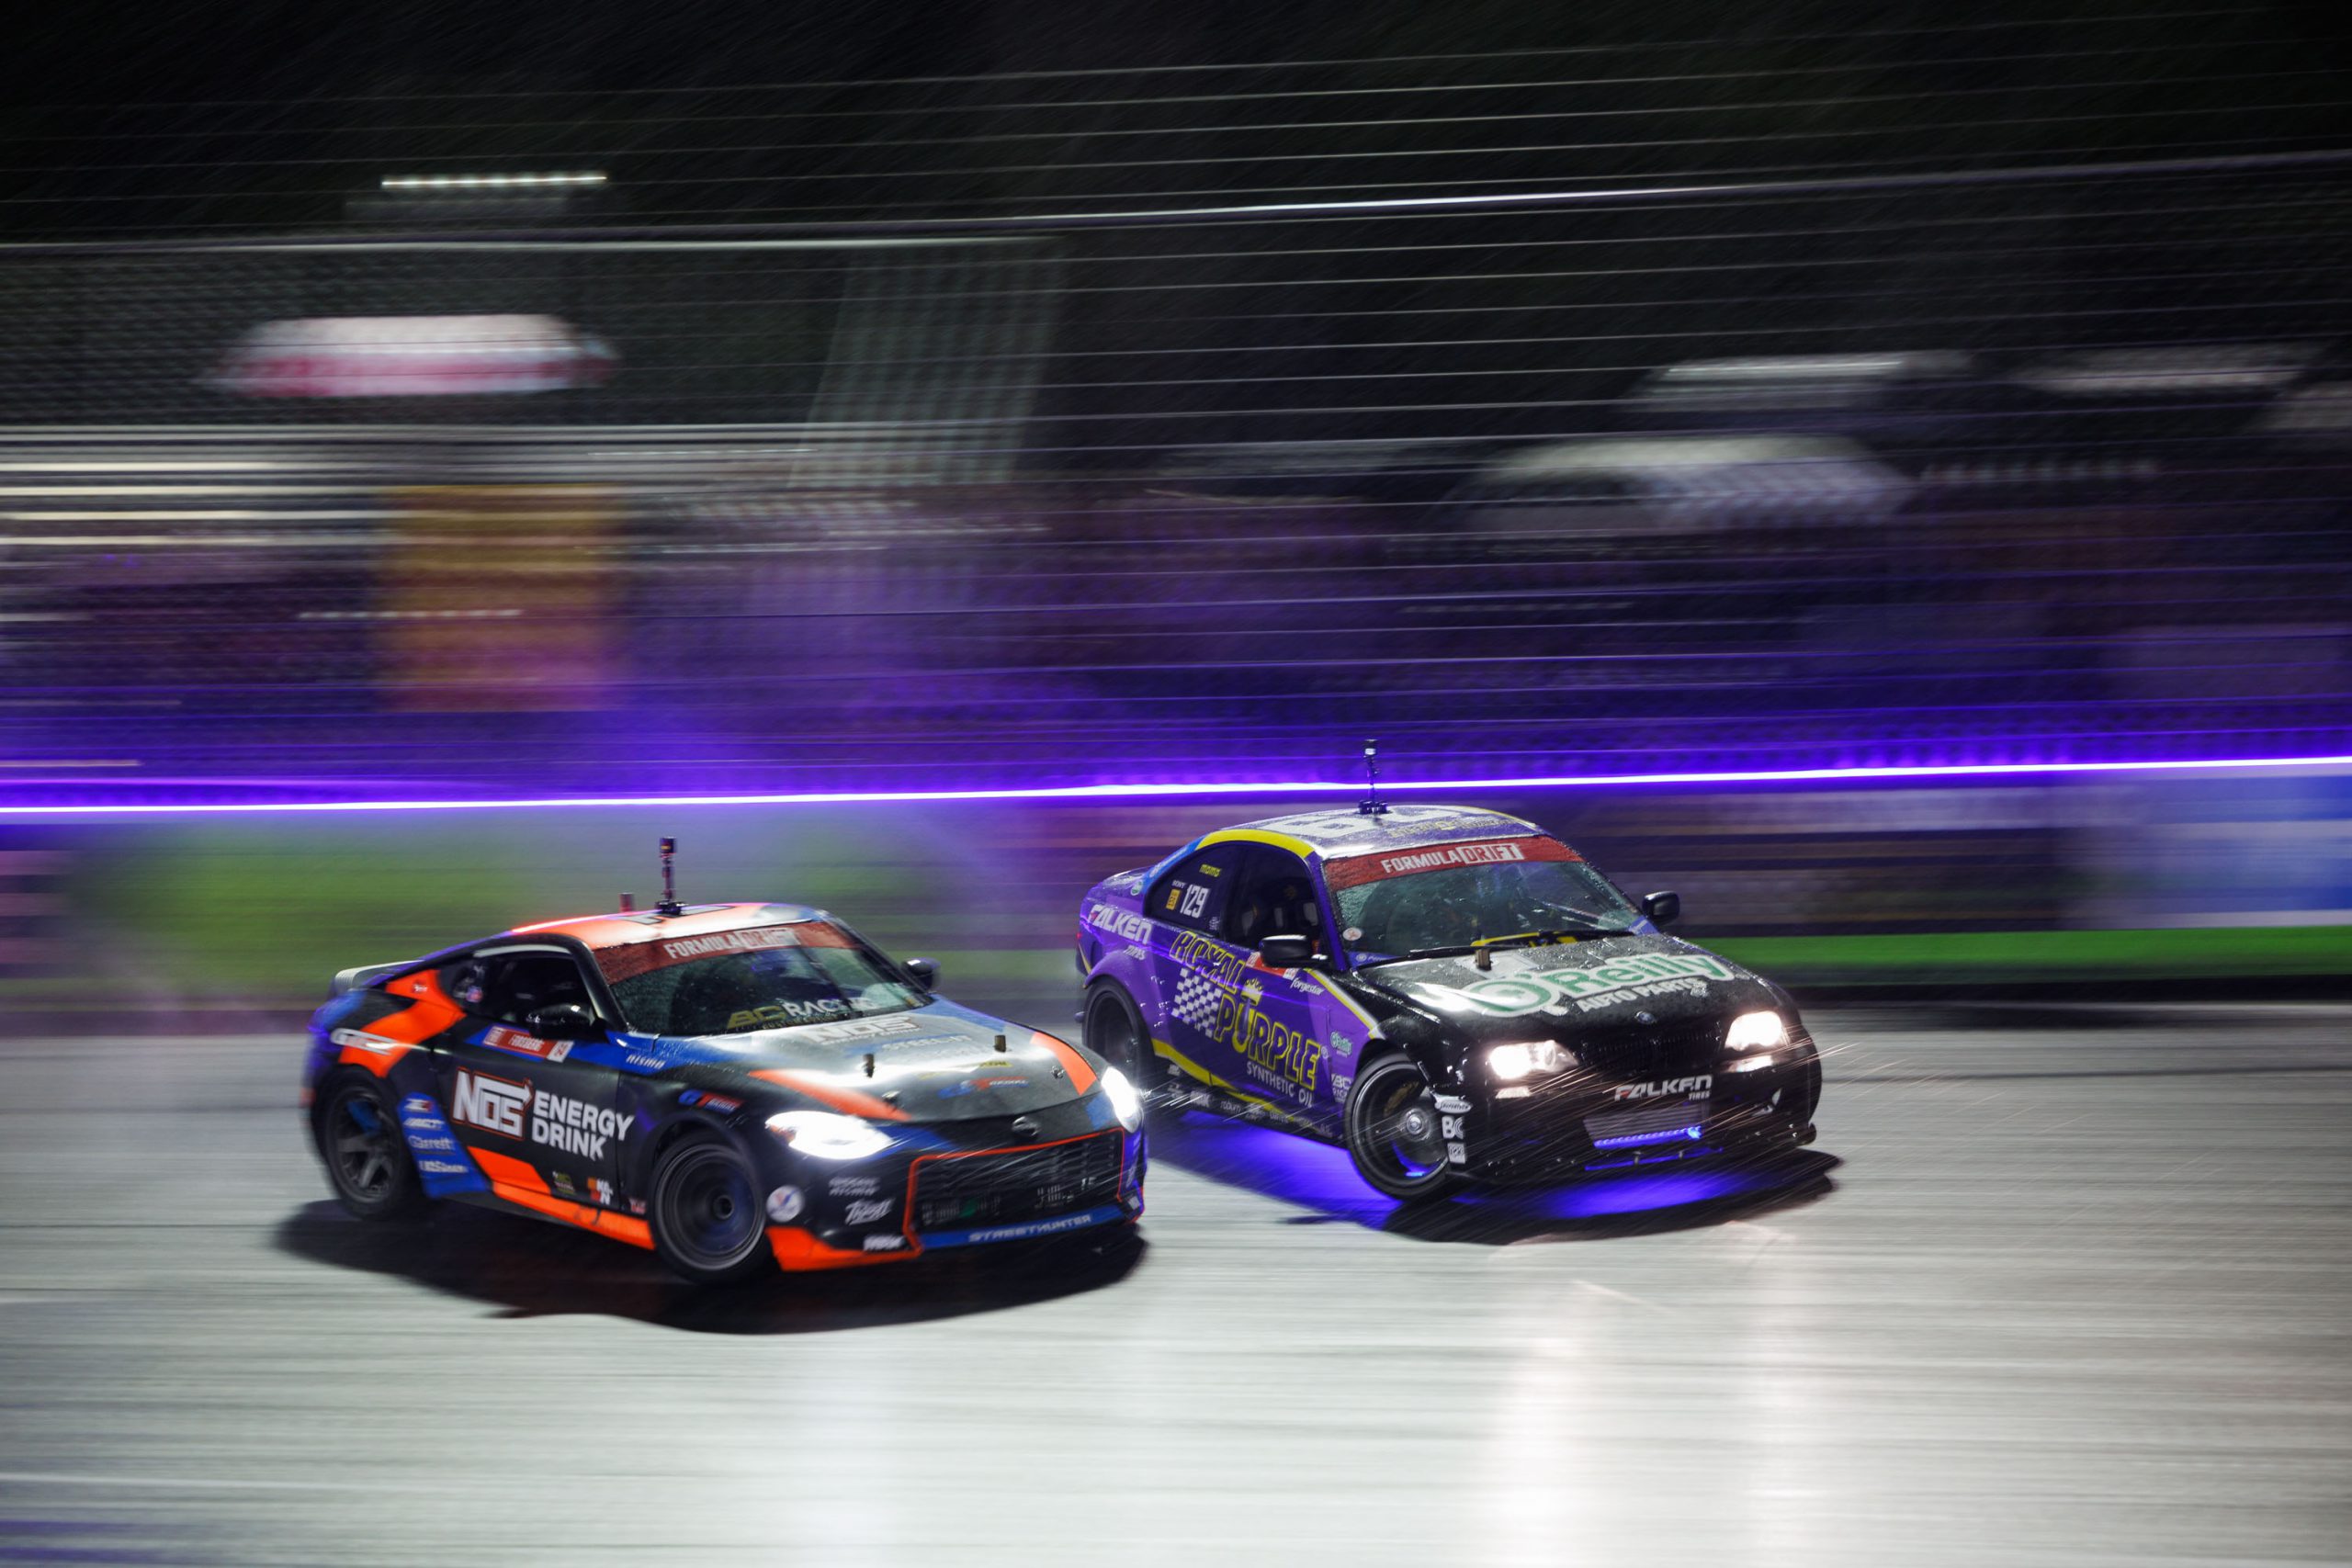 COMPETITION RESULTS FROM ROUND 3 OF 2022 FORMULA DRIFT PRO AND ROUND 1